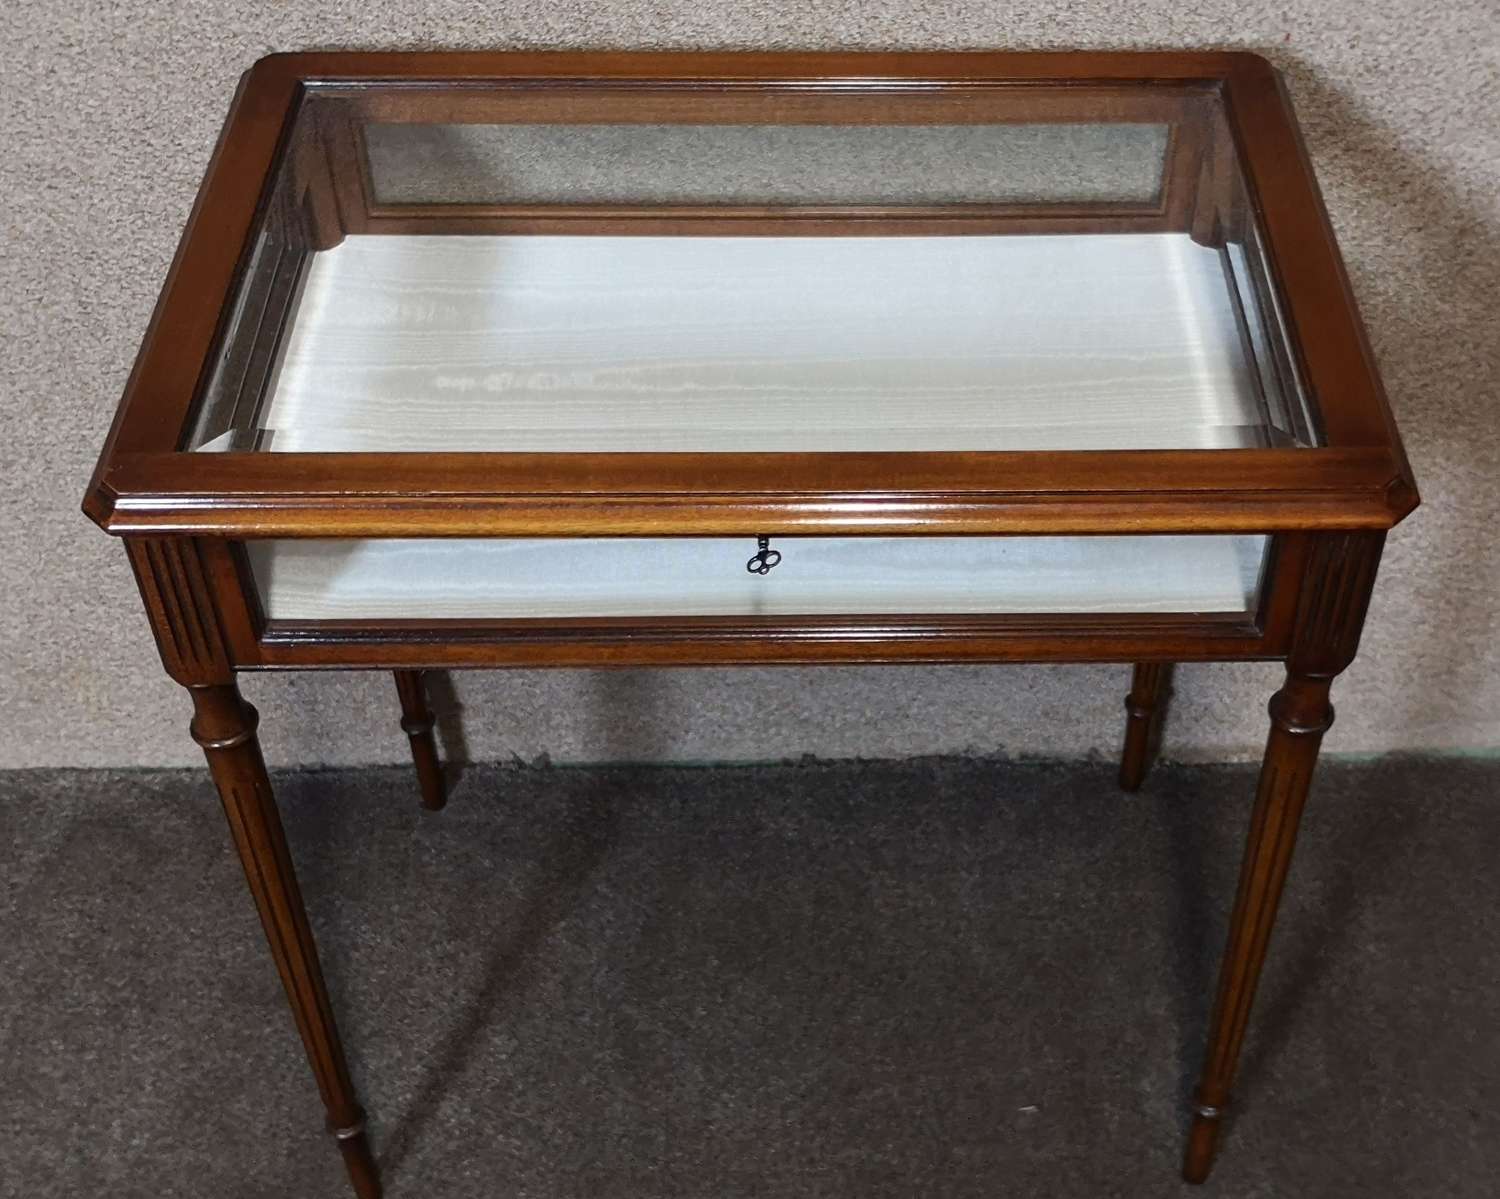 Reprodux Bevan Funnell Mahogany Bijouterie Curio Table